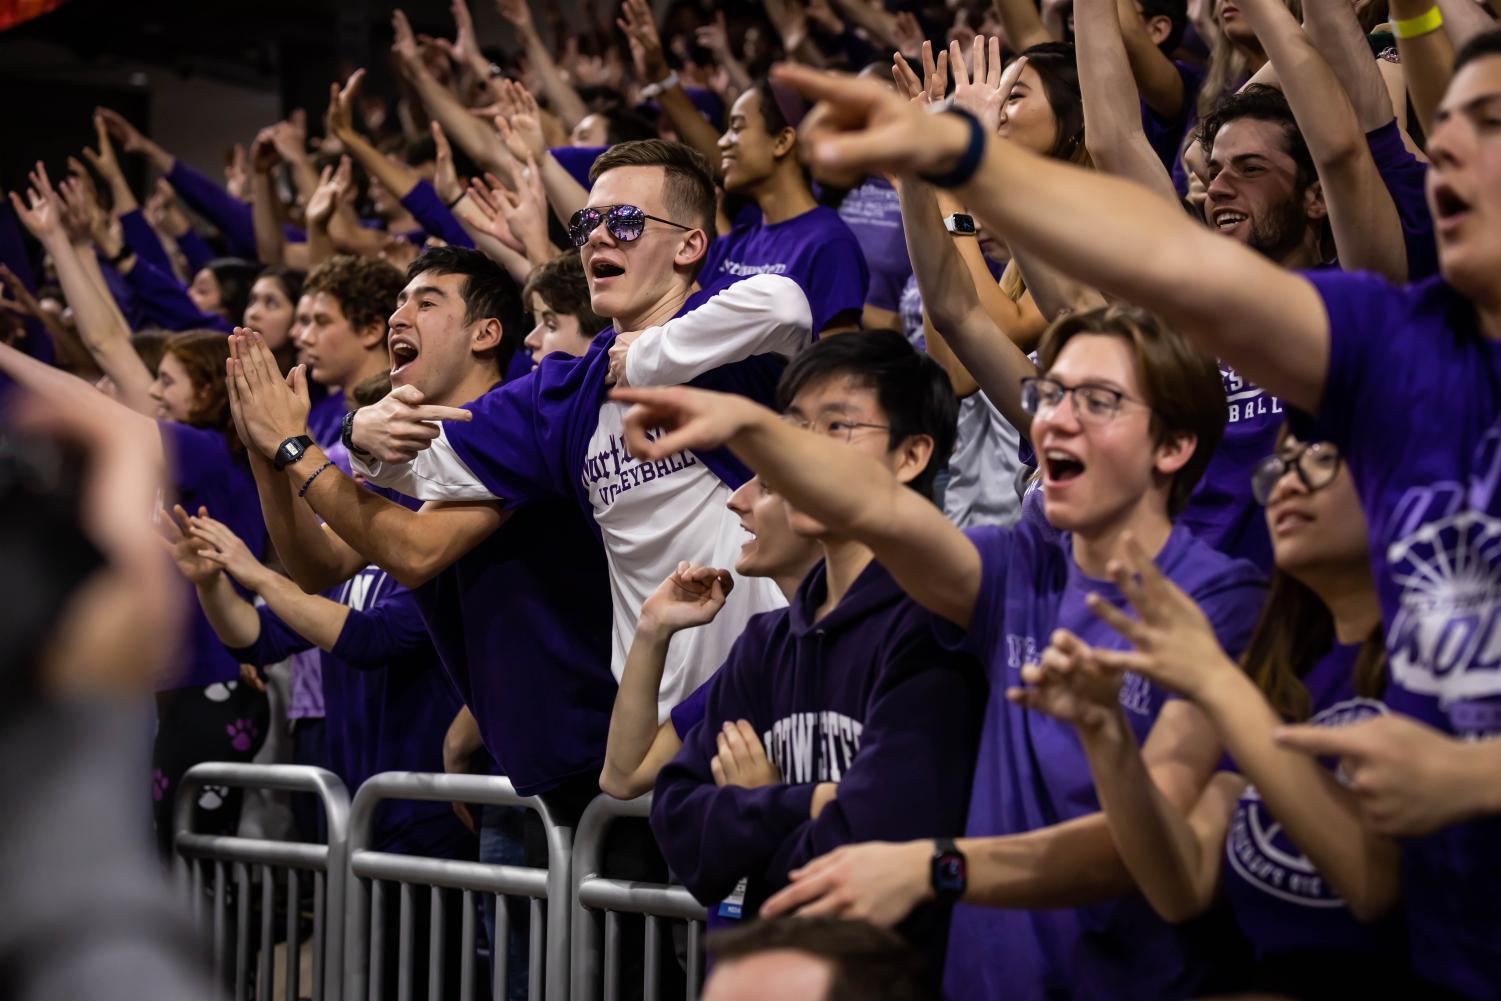 A crowd wearing purple reaches out to the basketball court.